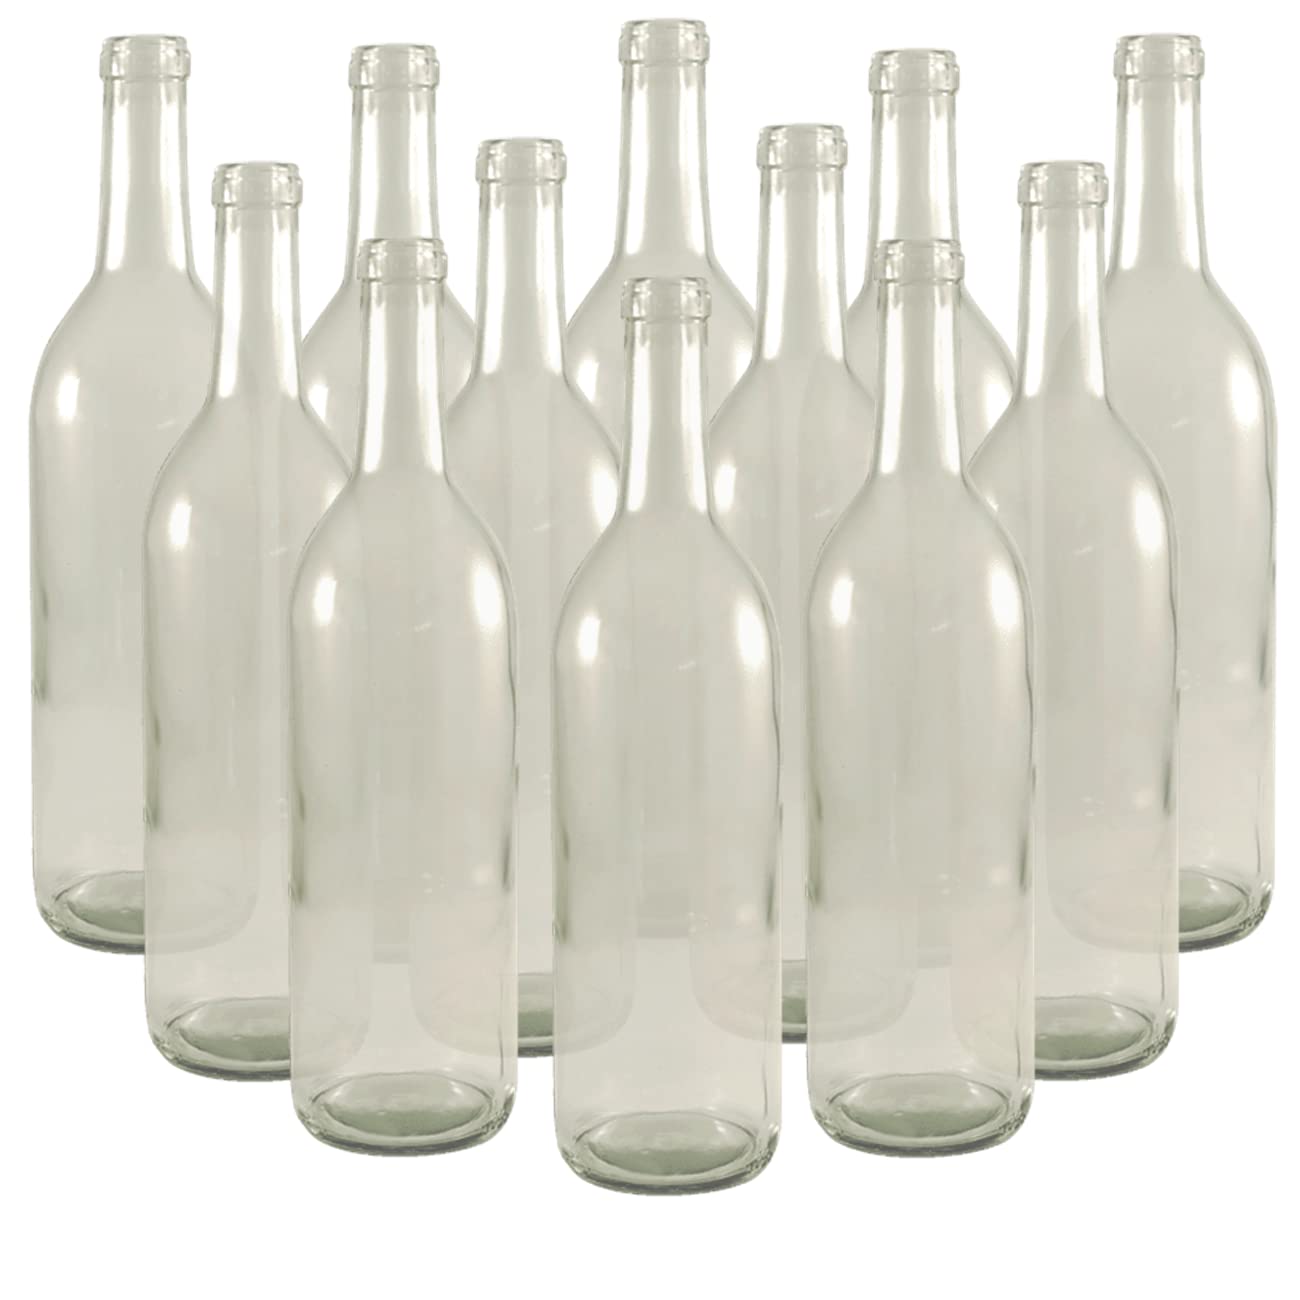 North Mountain Supply 750ml Glass Bordeaux Wine Bottles with Twist-N-Seal  Capsules - Case of 12 (Clear/Flint)